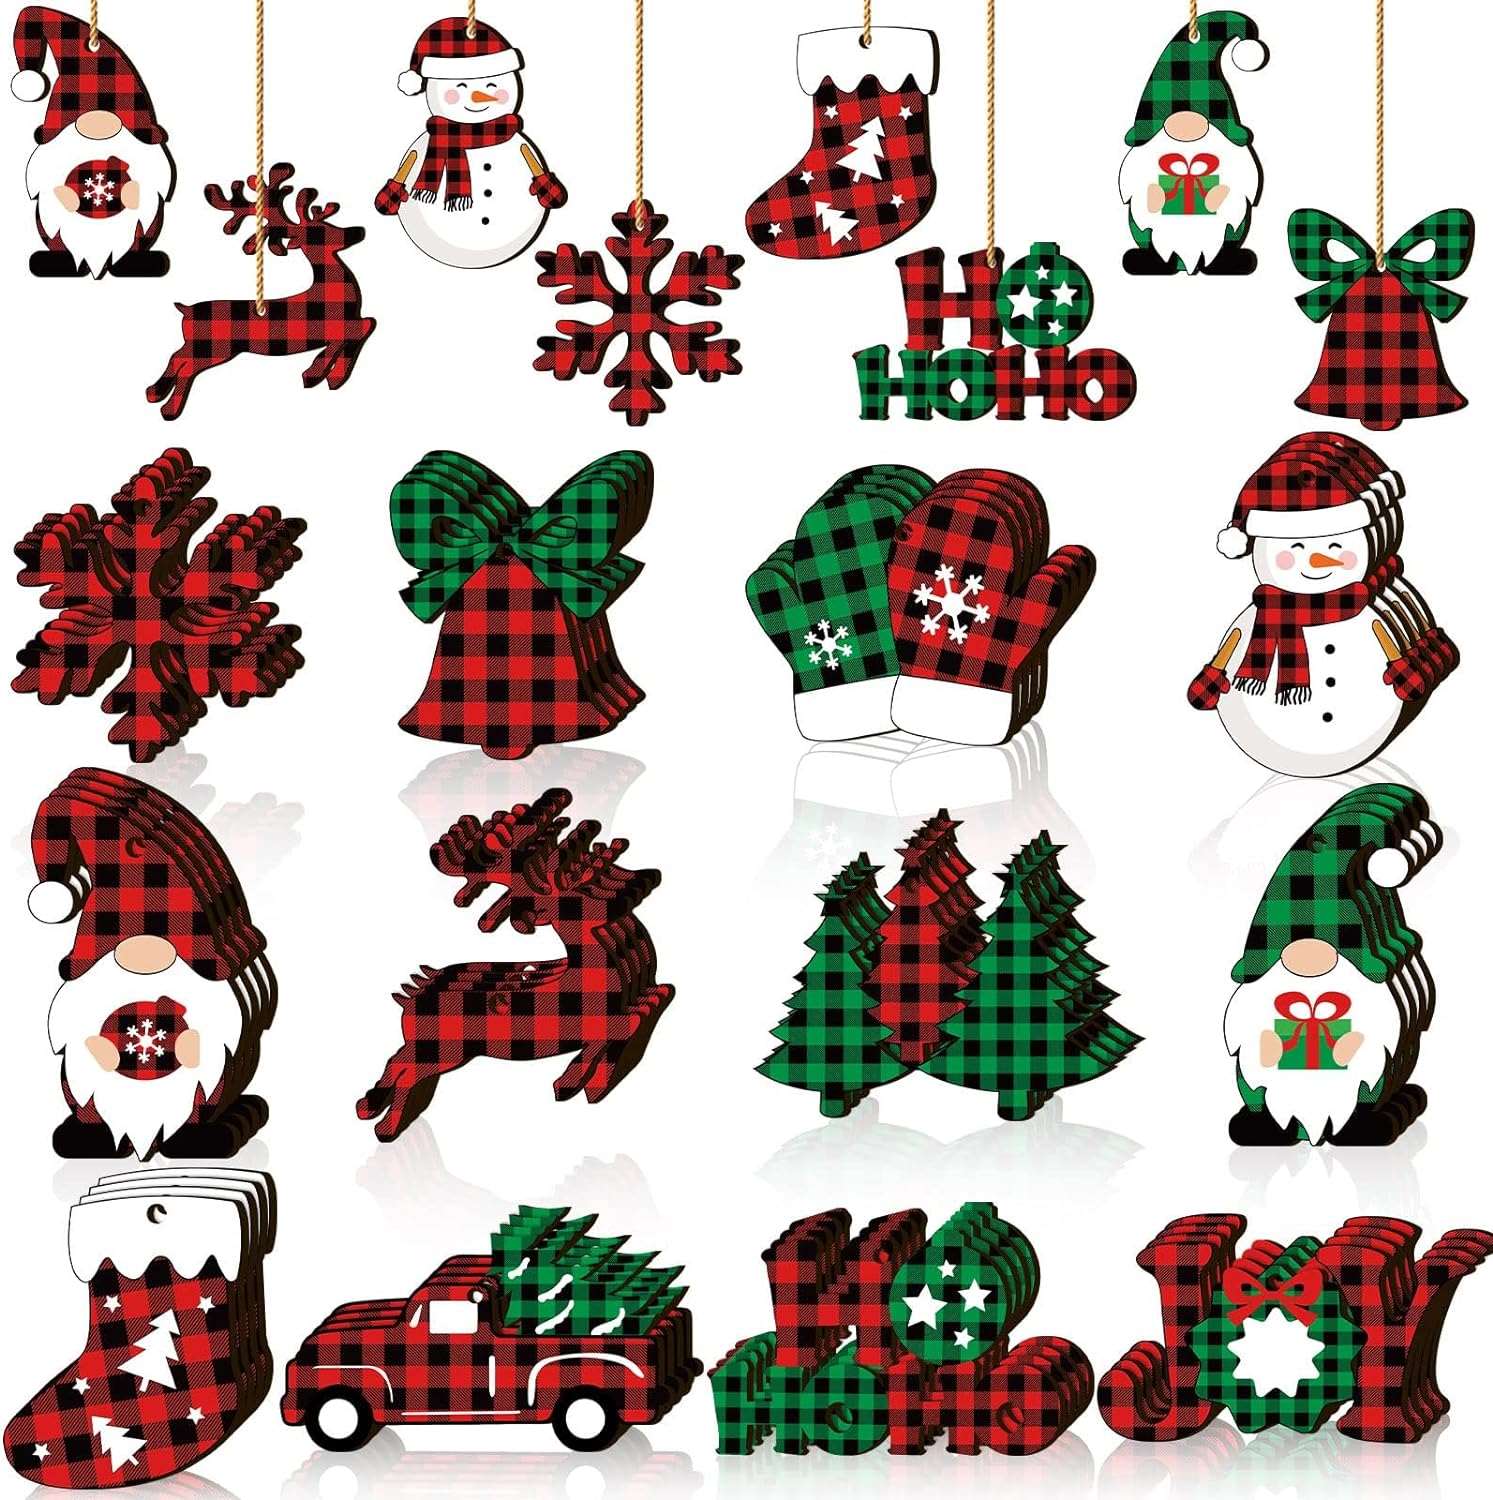 24 Pieces Christmas Gnome Wooden Ornaments Wood Hanging Decorations for Christmas Tree Santa Clause Elf Hanging Wood Crafts - Cykapu